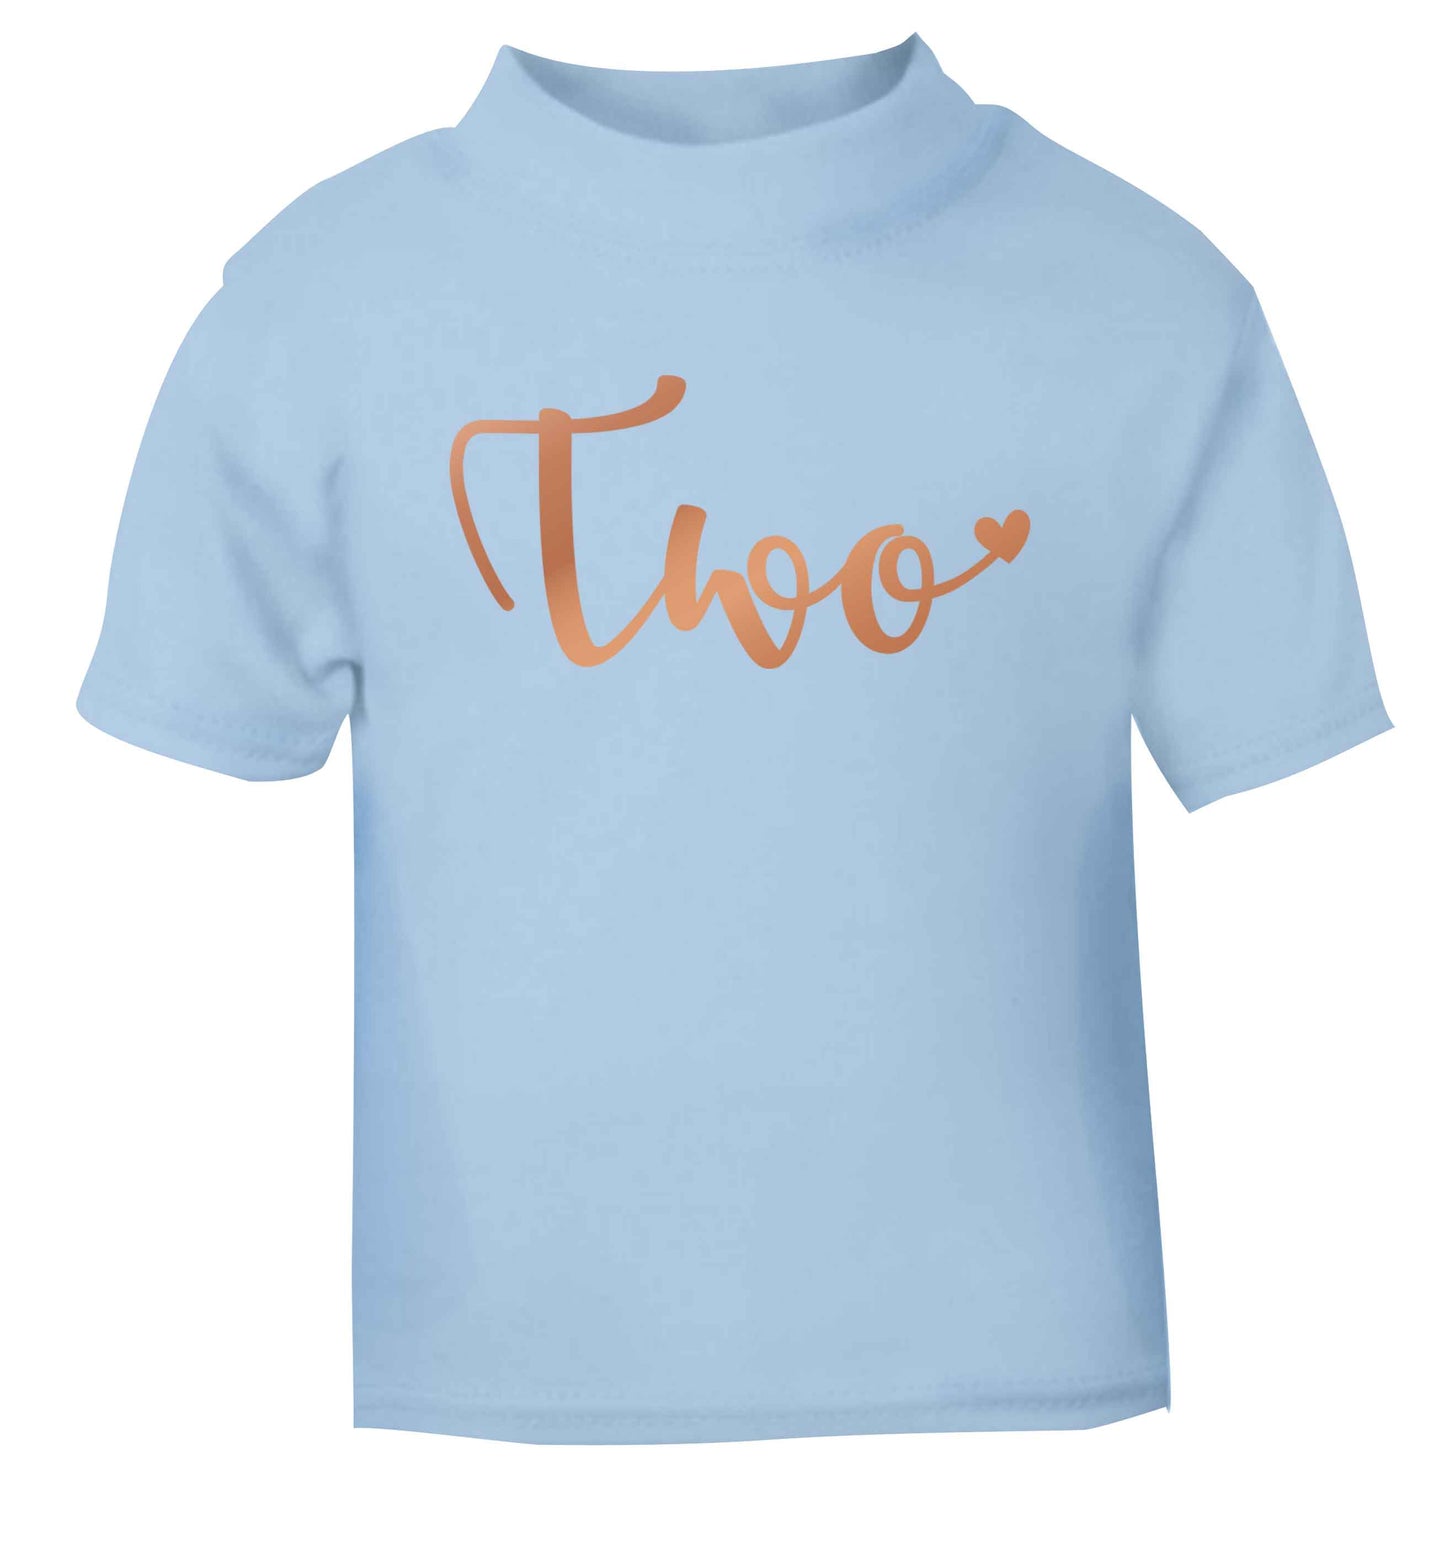 Two rose gold light blue baby toddler Tshirt 2 Years